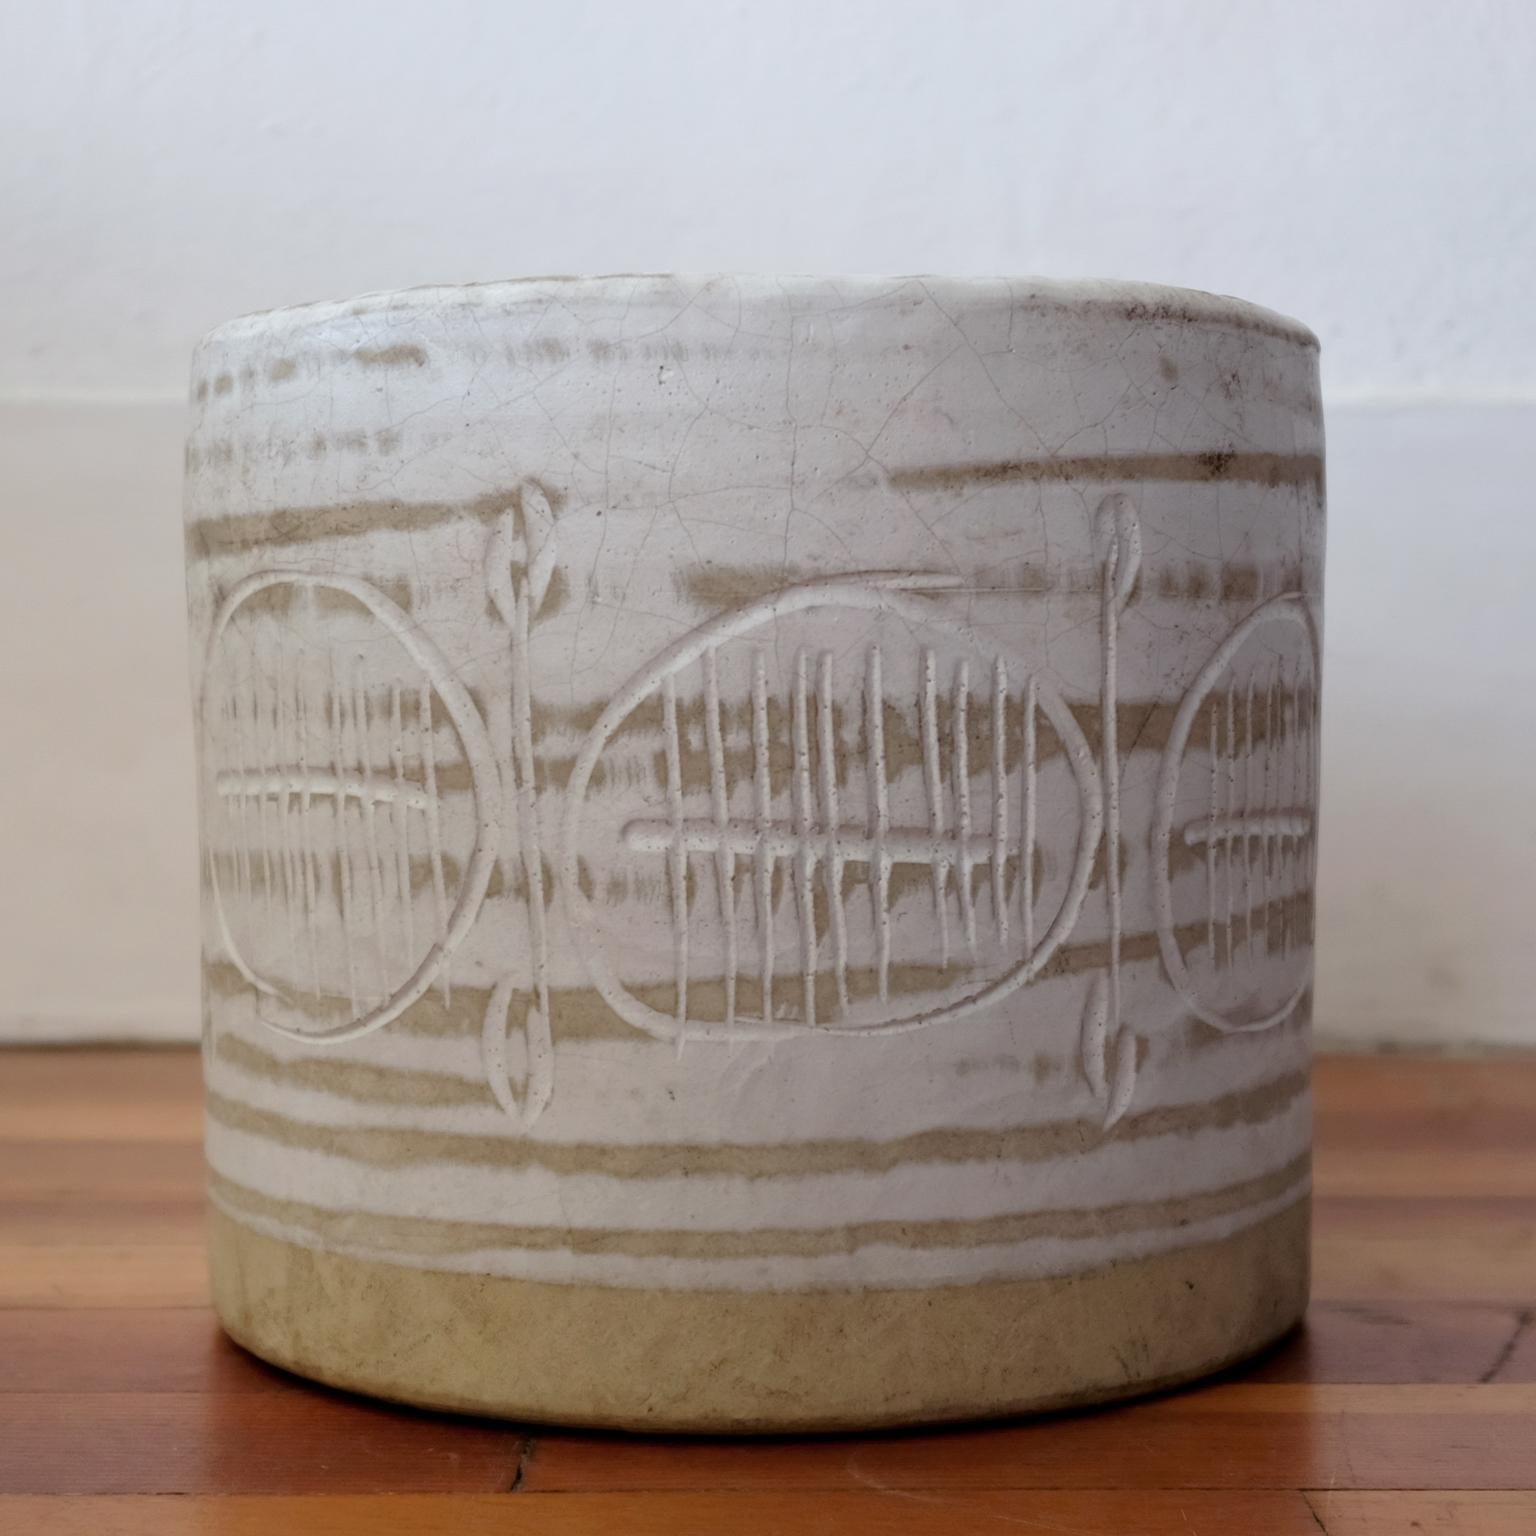 Ceramic planter by Jane and Gordon Martz for their company, Marshall Studios. Natural tan clay, brushed white glaze and an incised decoration around the entire planter. Hand formed, 1950s.